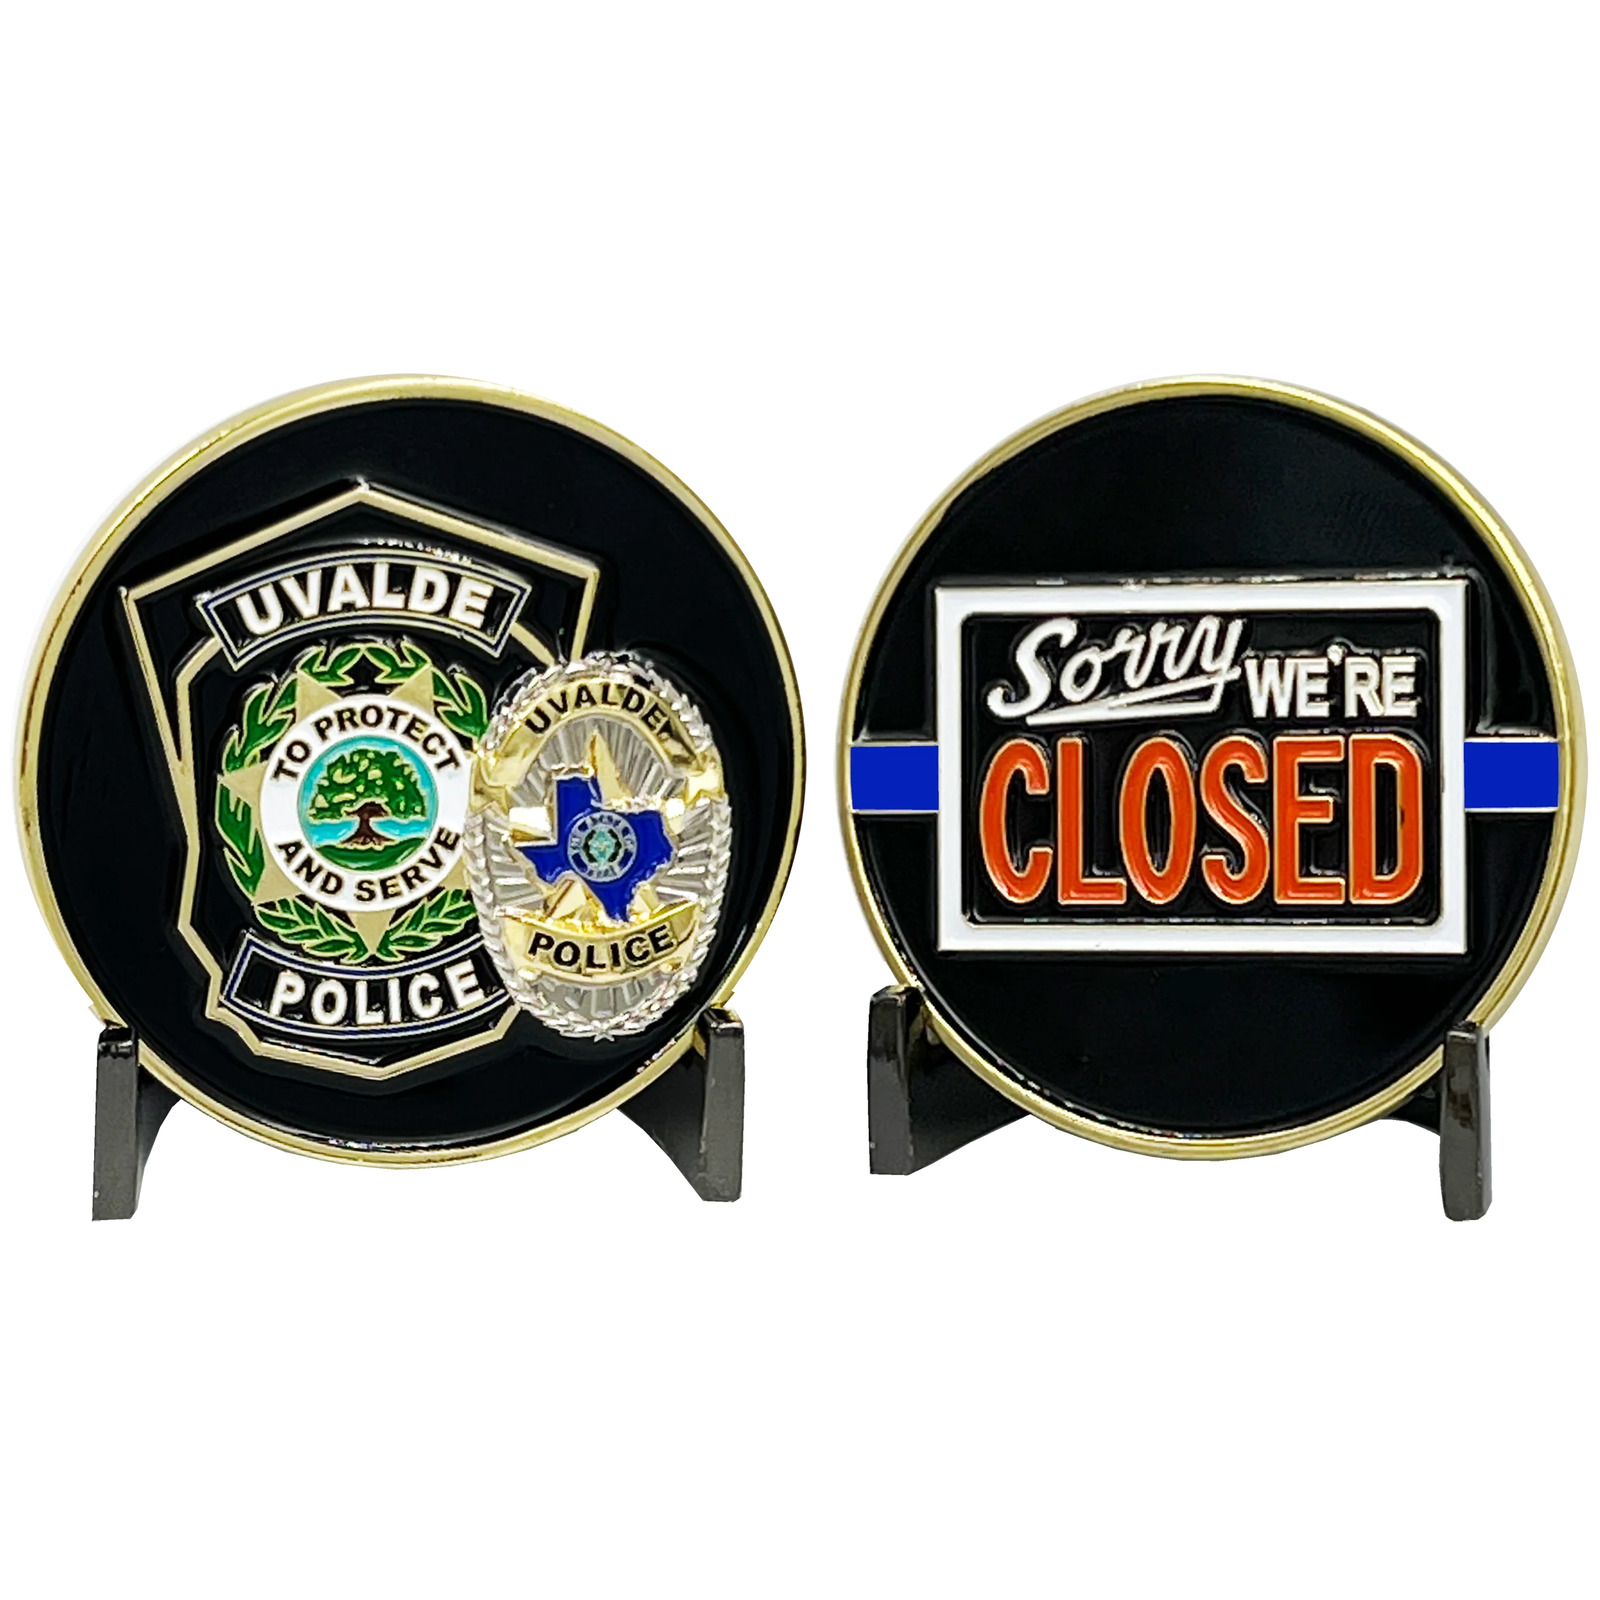 EL13-020 Uvalde TX Police Department Sorry We're Closed Challenge Coin Border Pa